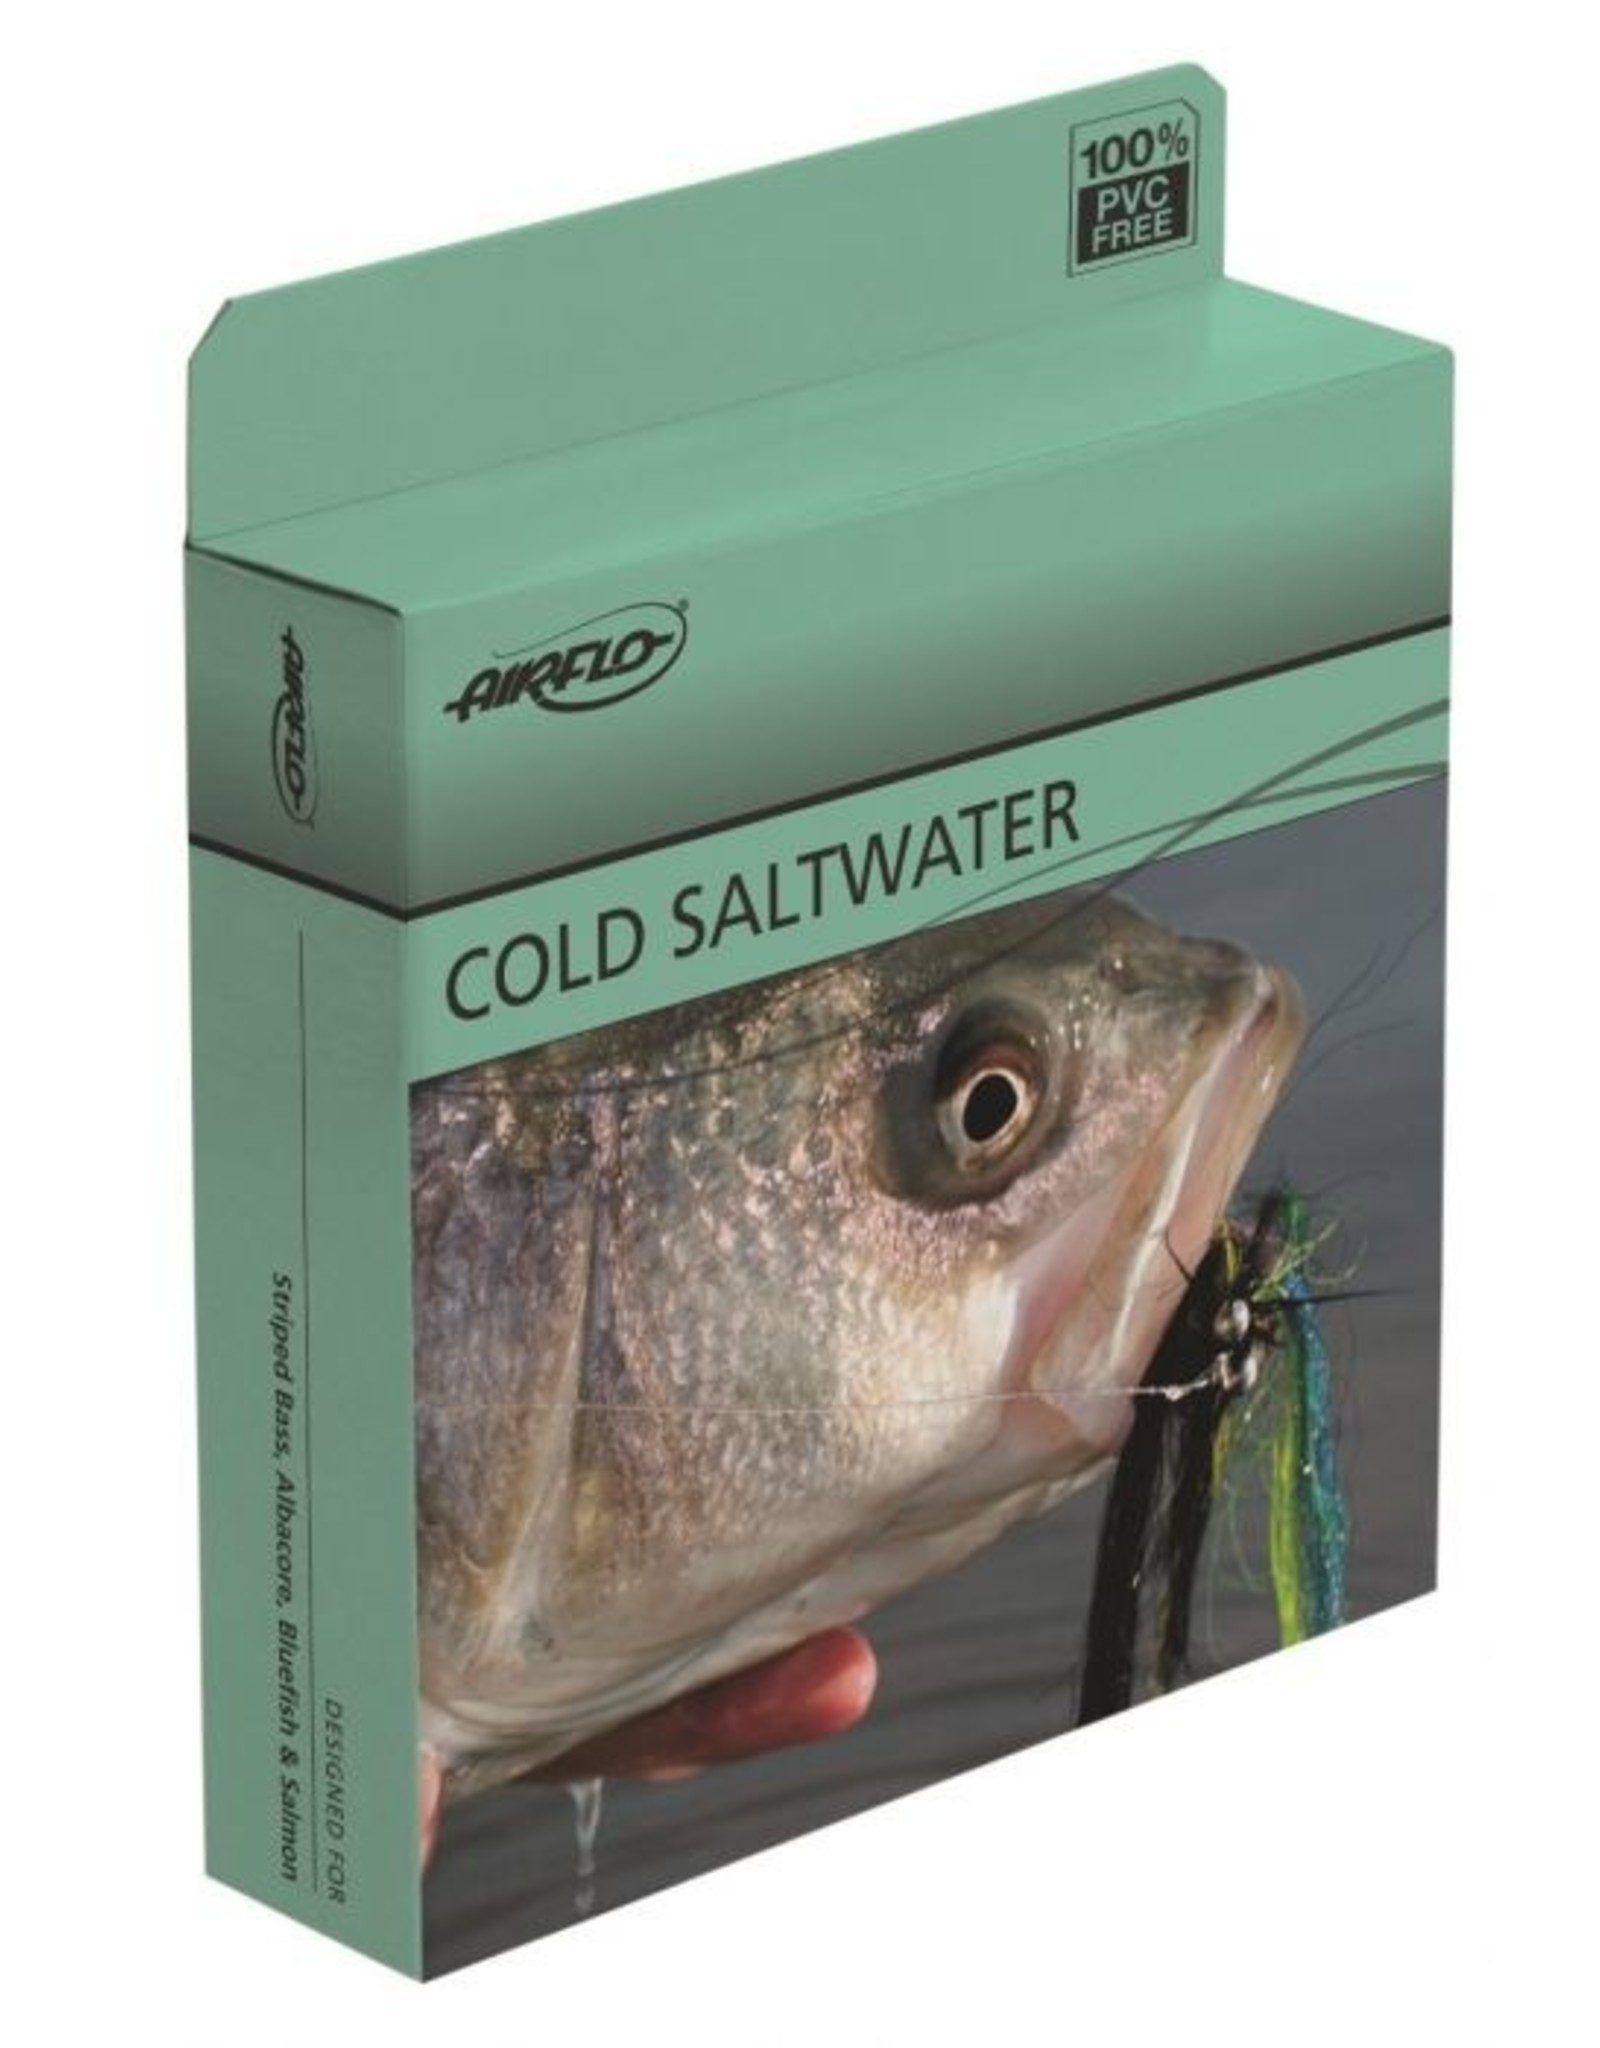 Airflo Cold Saltwater Fly Line